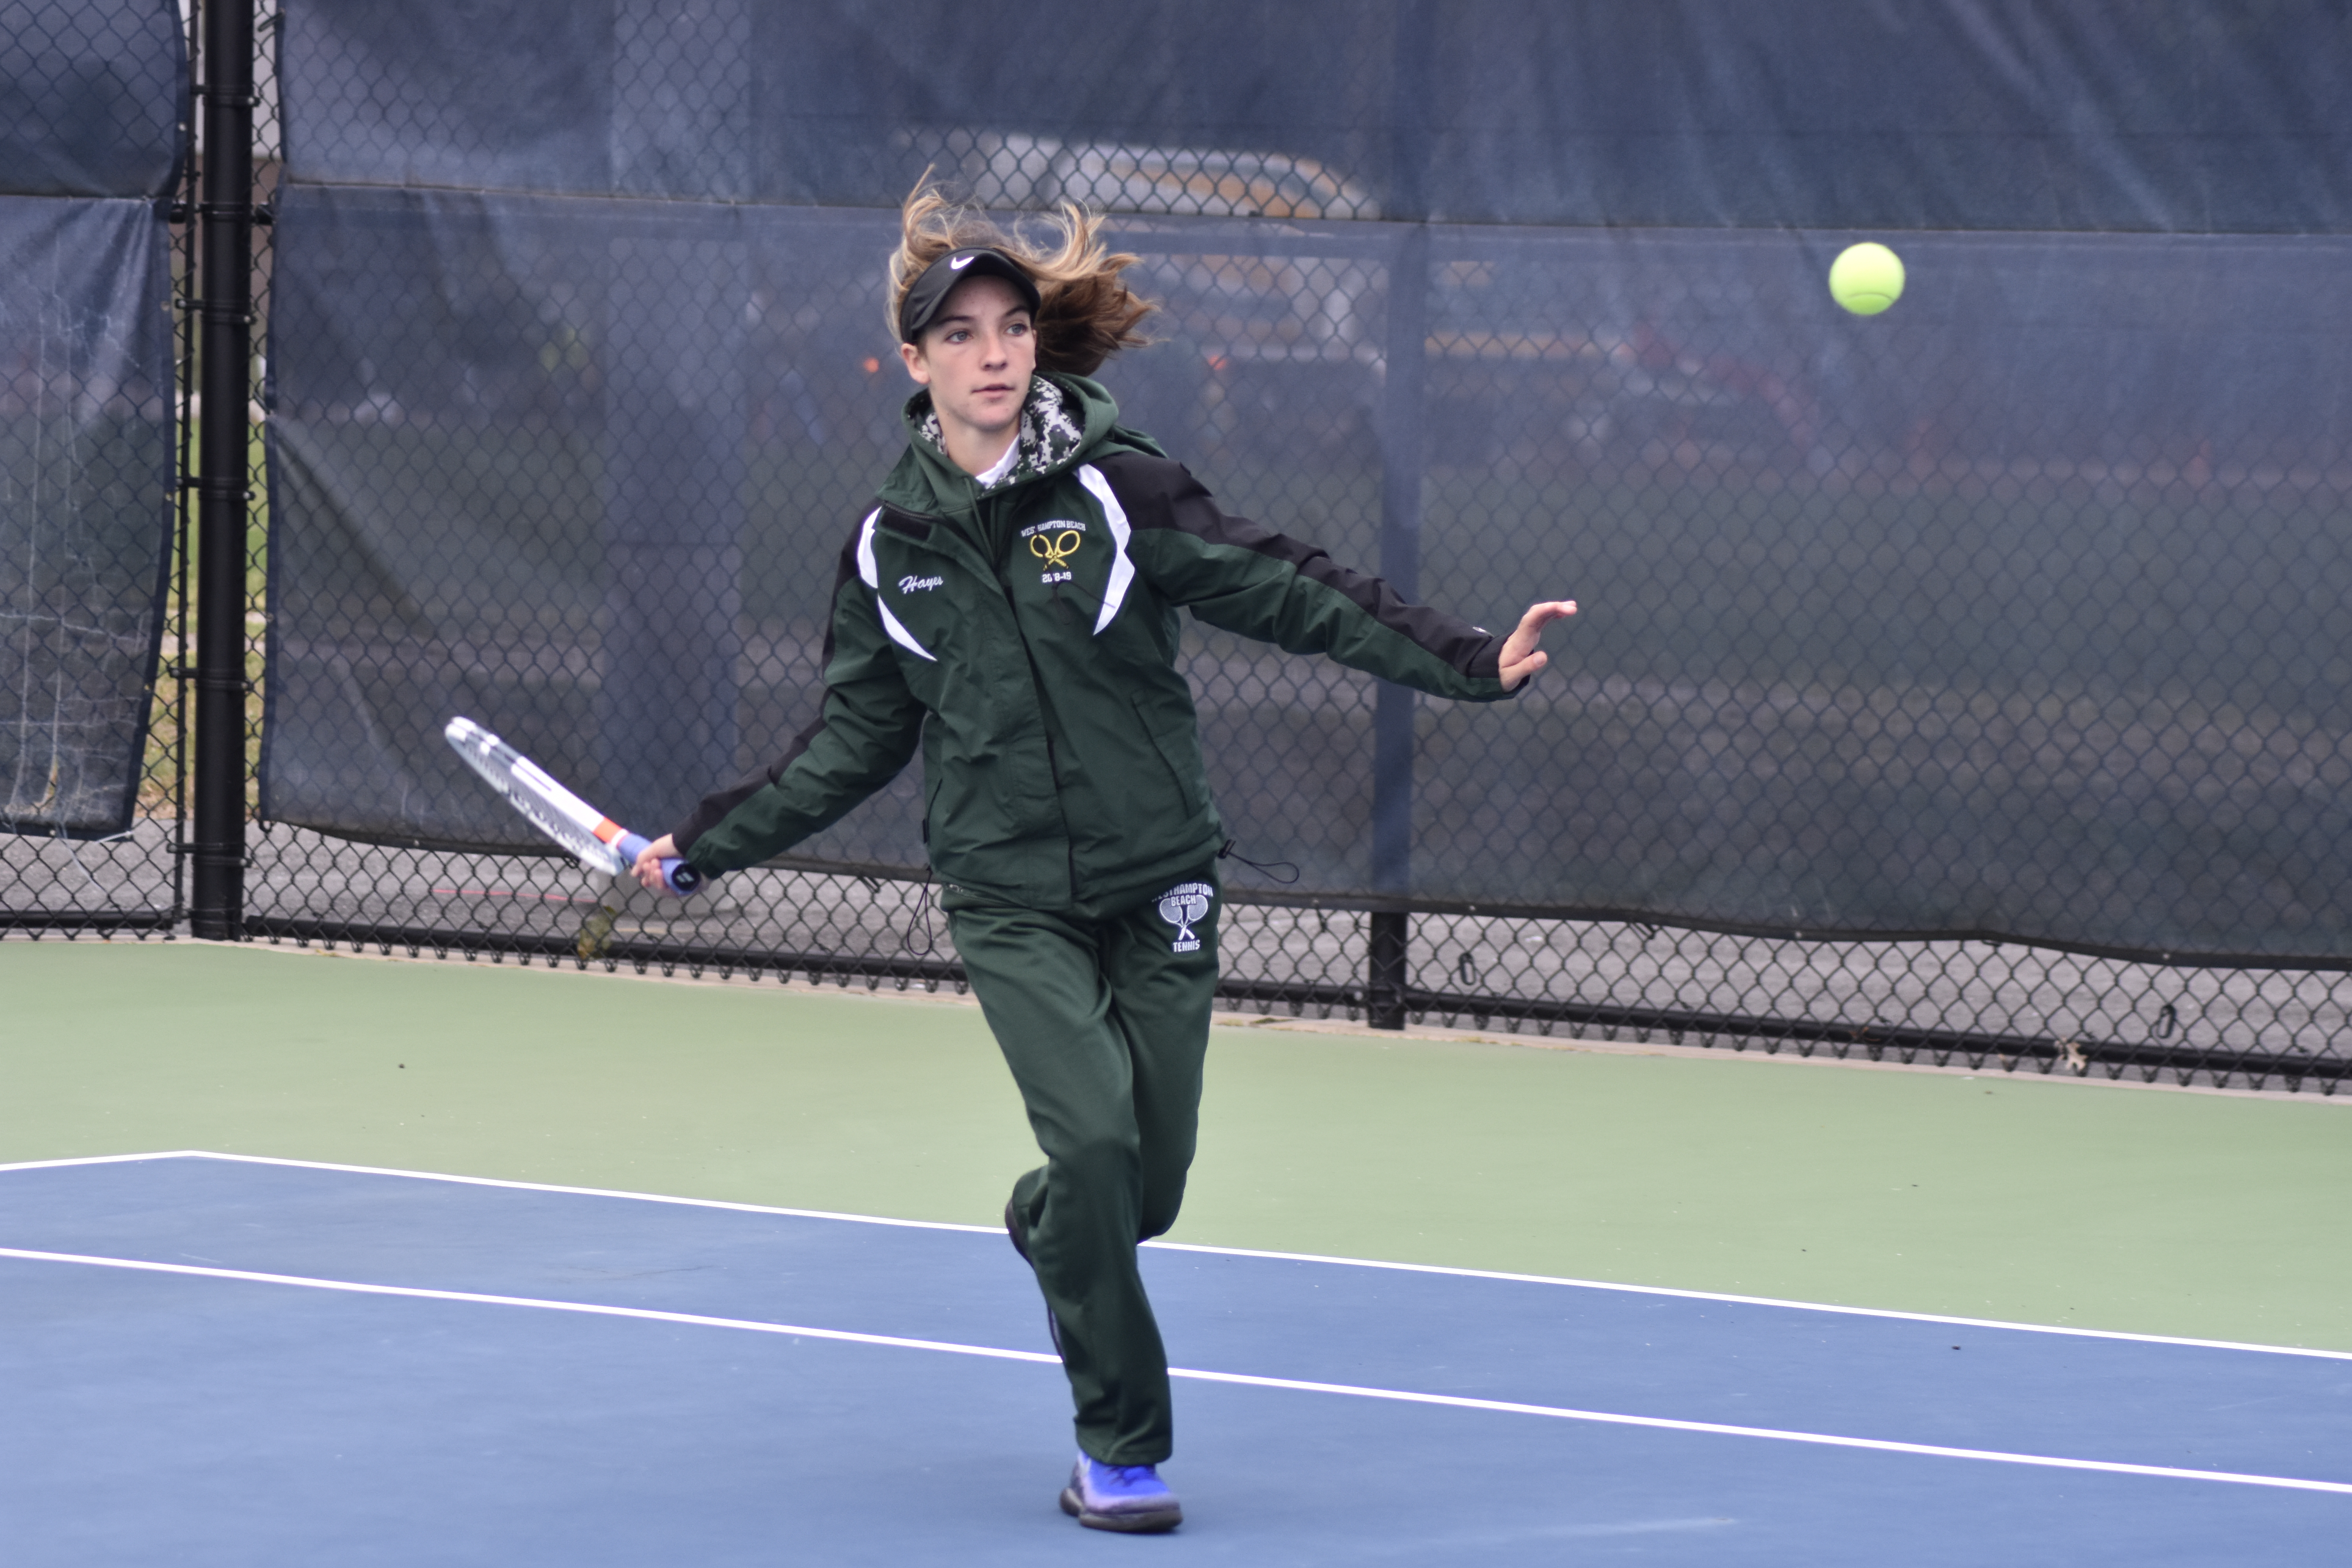 Westhampton Beach sophomore Rose Hayes won the Division IV singles title for the third consecutive year.